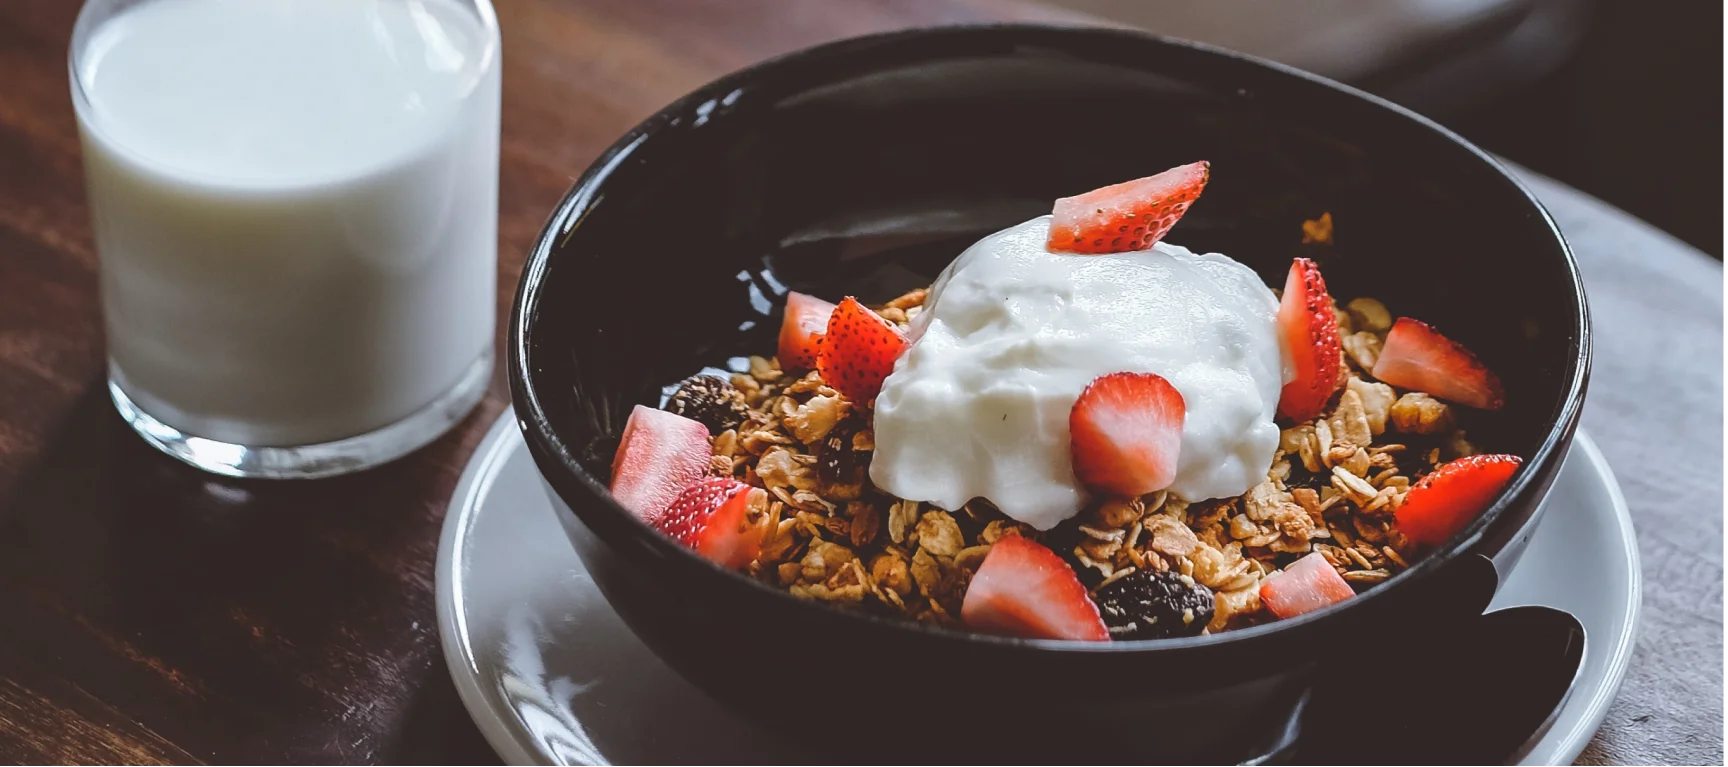 Muesli bowl with strawberries, quark and a glass of milk